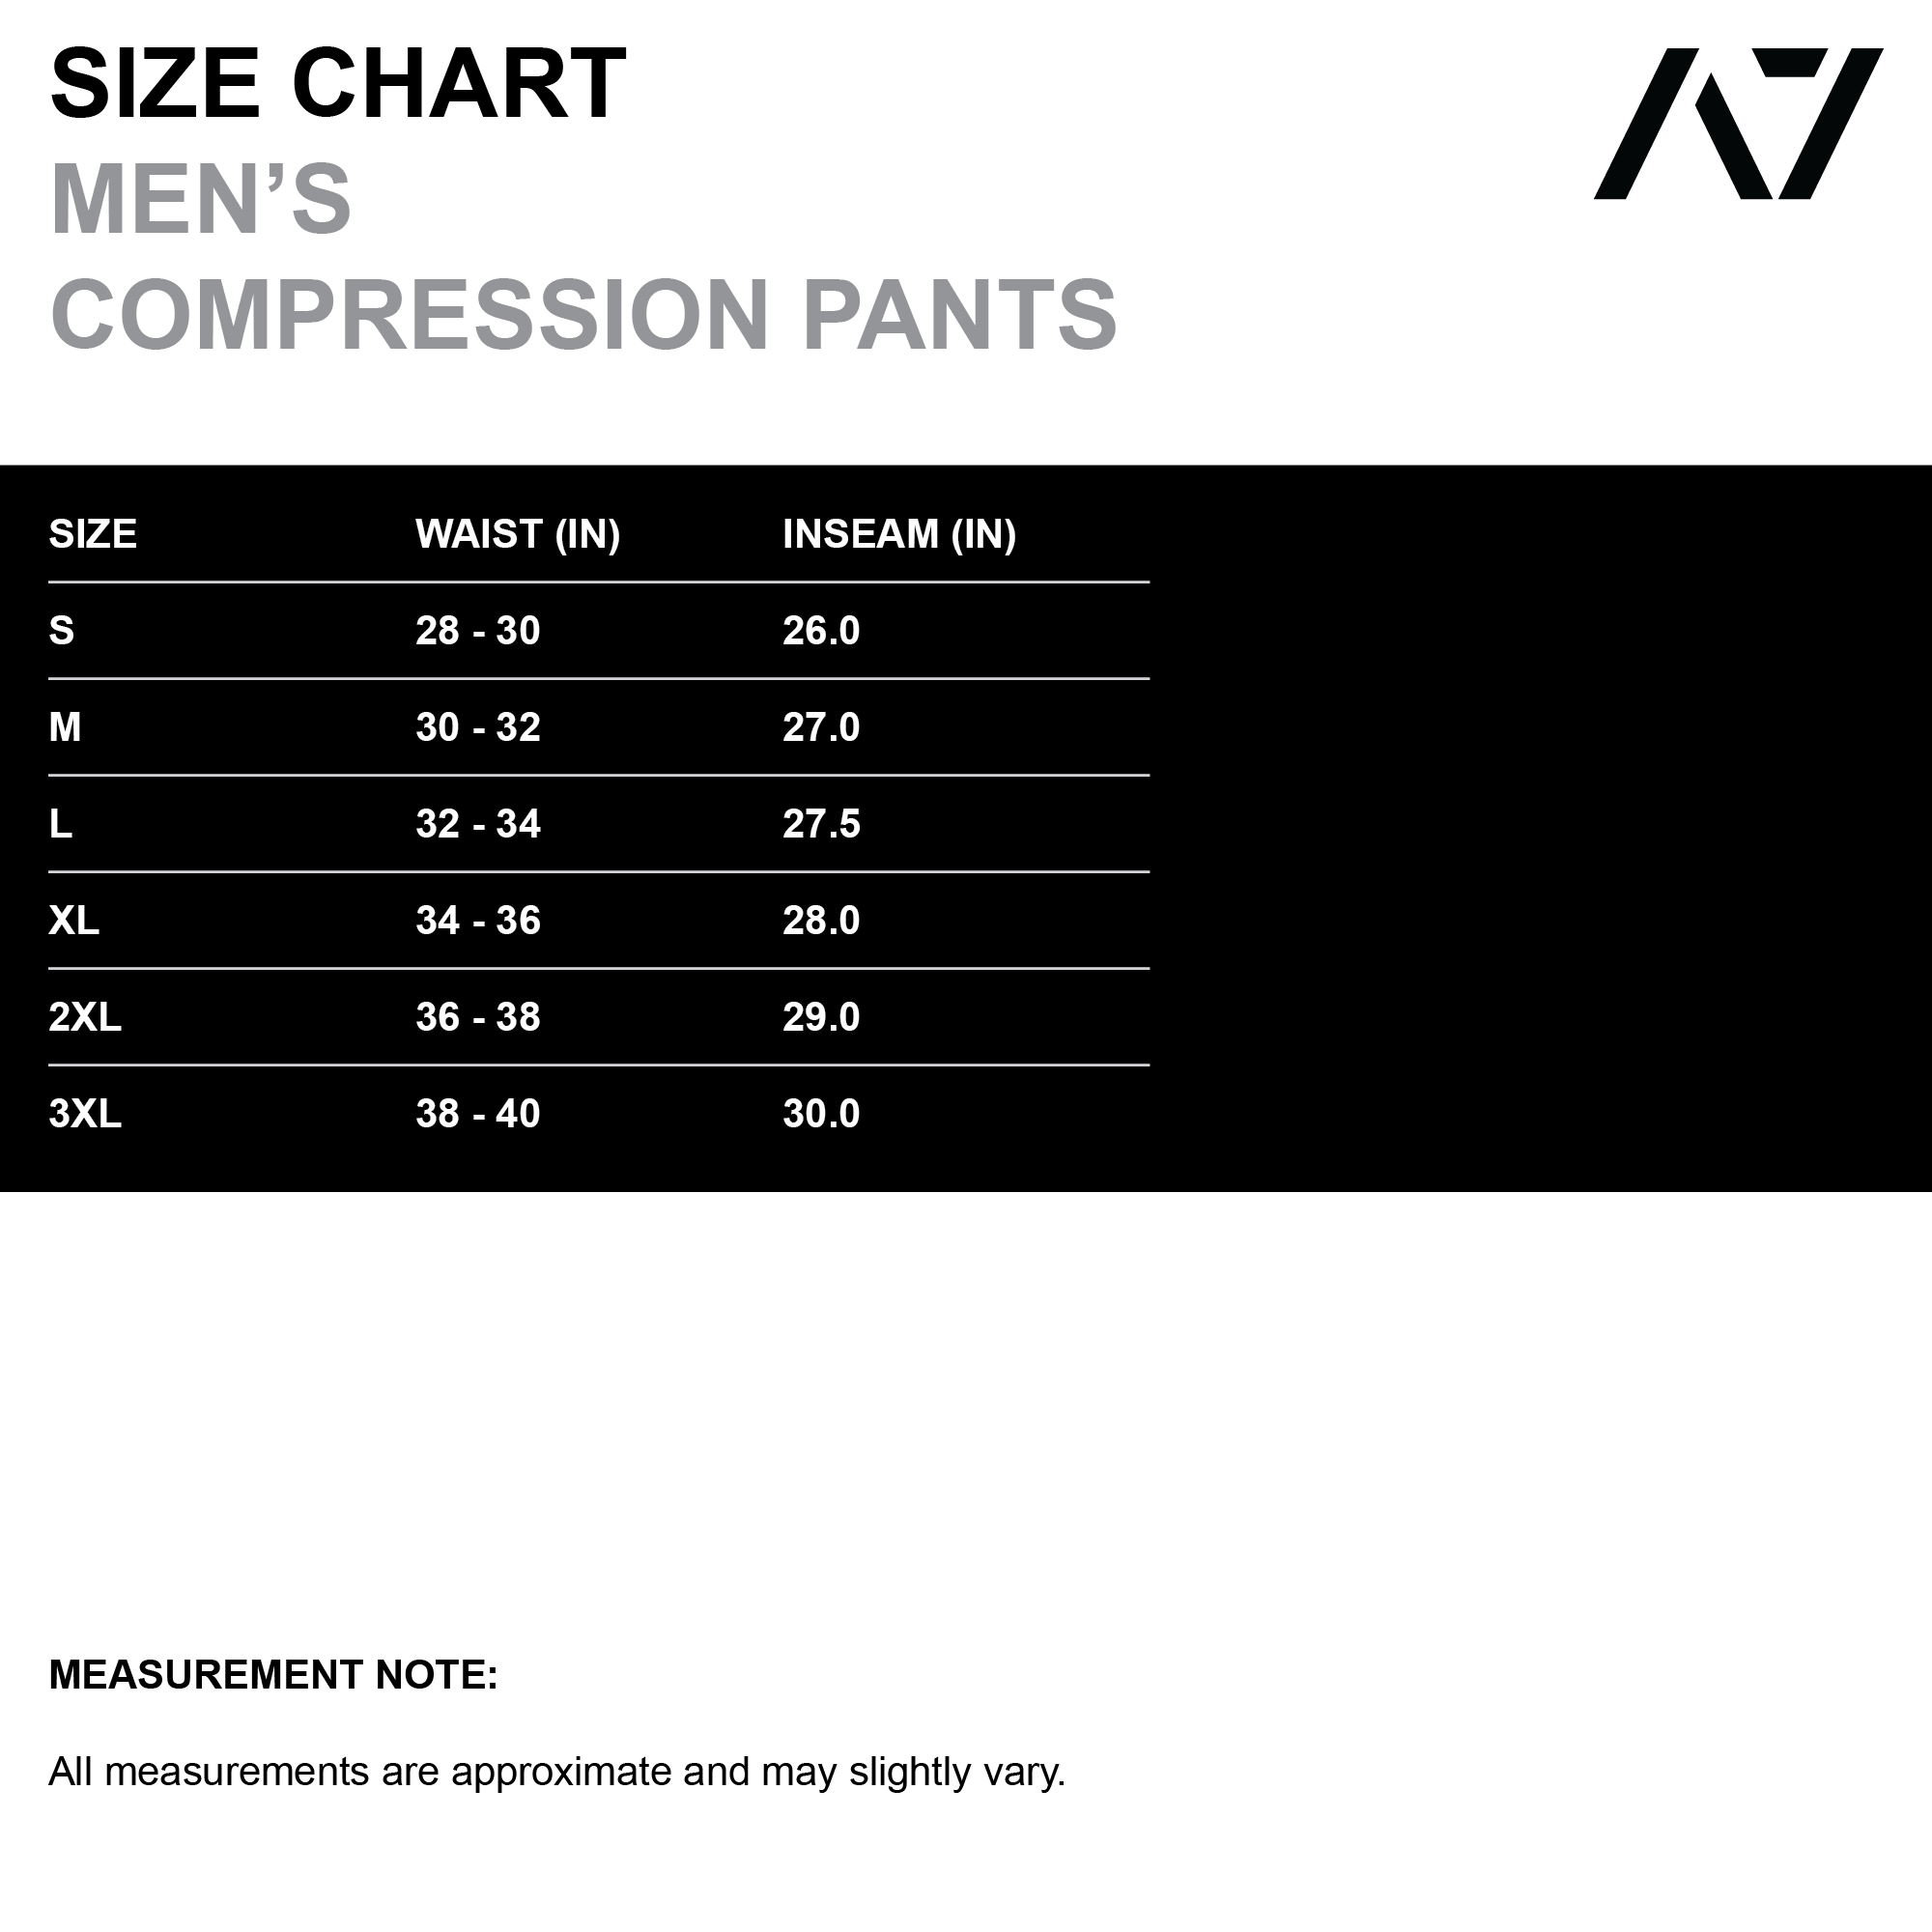 Compression pants for a true lifter. Keeping comfort and performance in mind, we have developed the perfect compression pants for a strength athlete. With the added room where necessary, the A7 Ox compression pants offer maximum comfort and coverage. The large cell phone pocket on the side allows you to keep your phone close-by when lifting and the clip keeps your keys handy. 